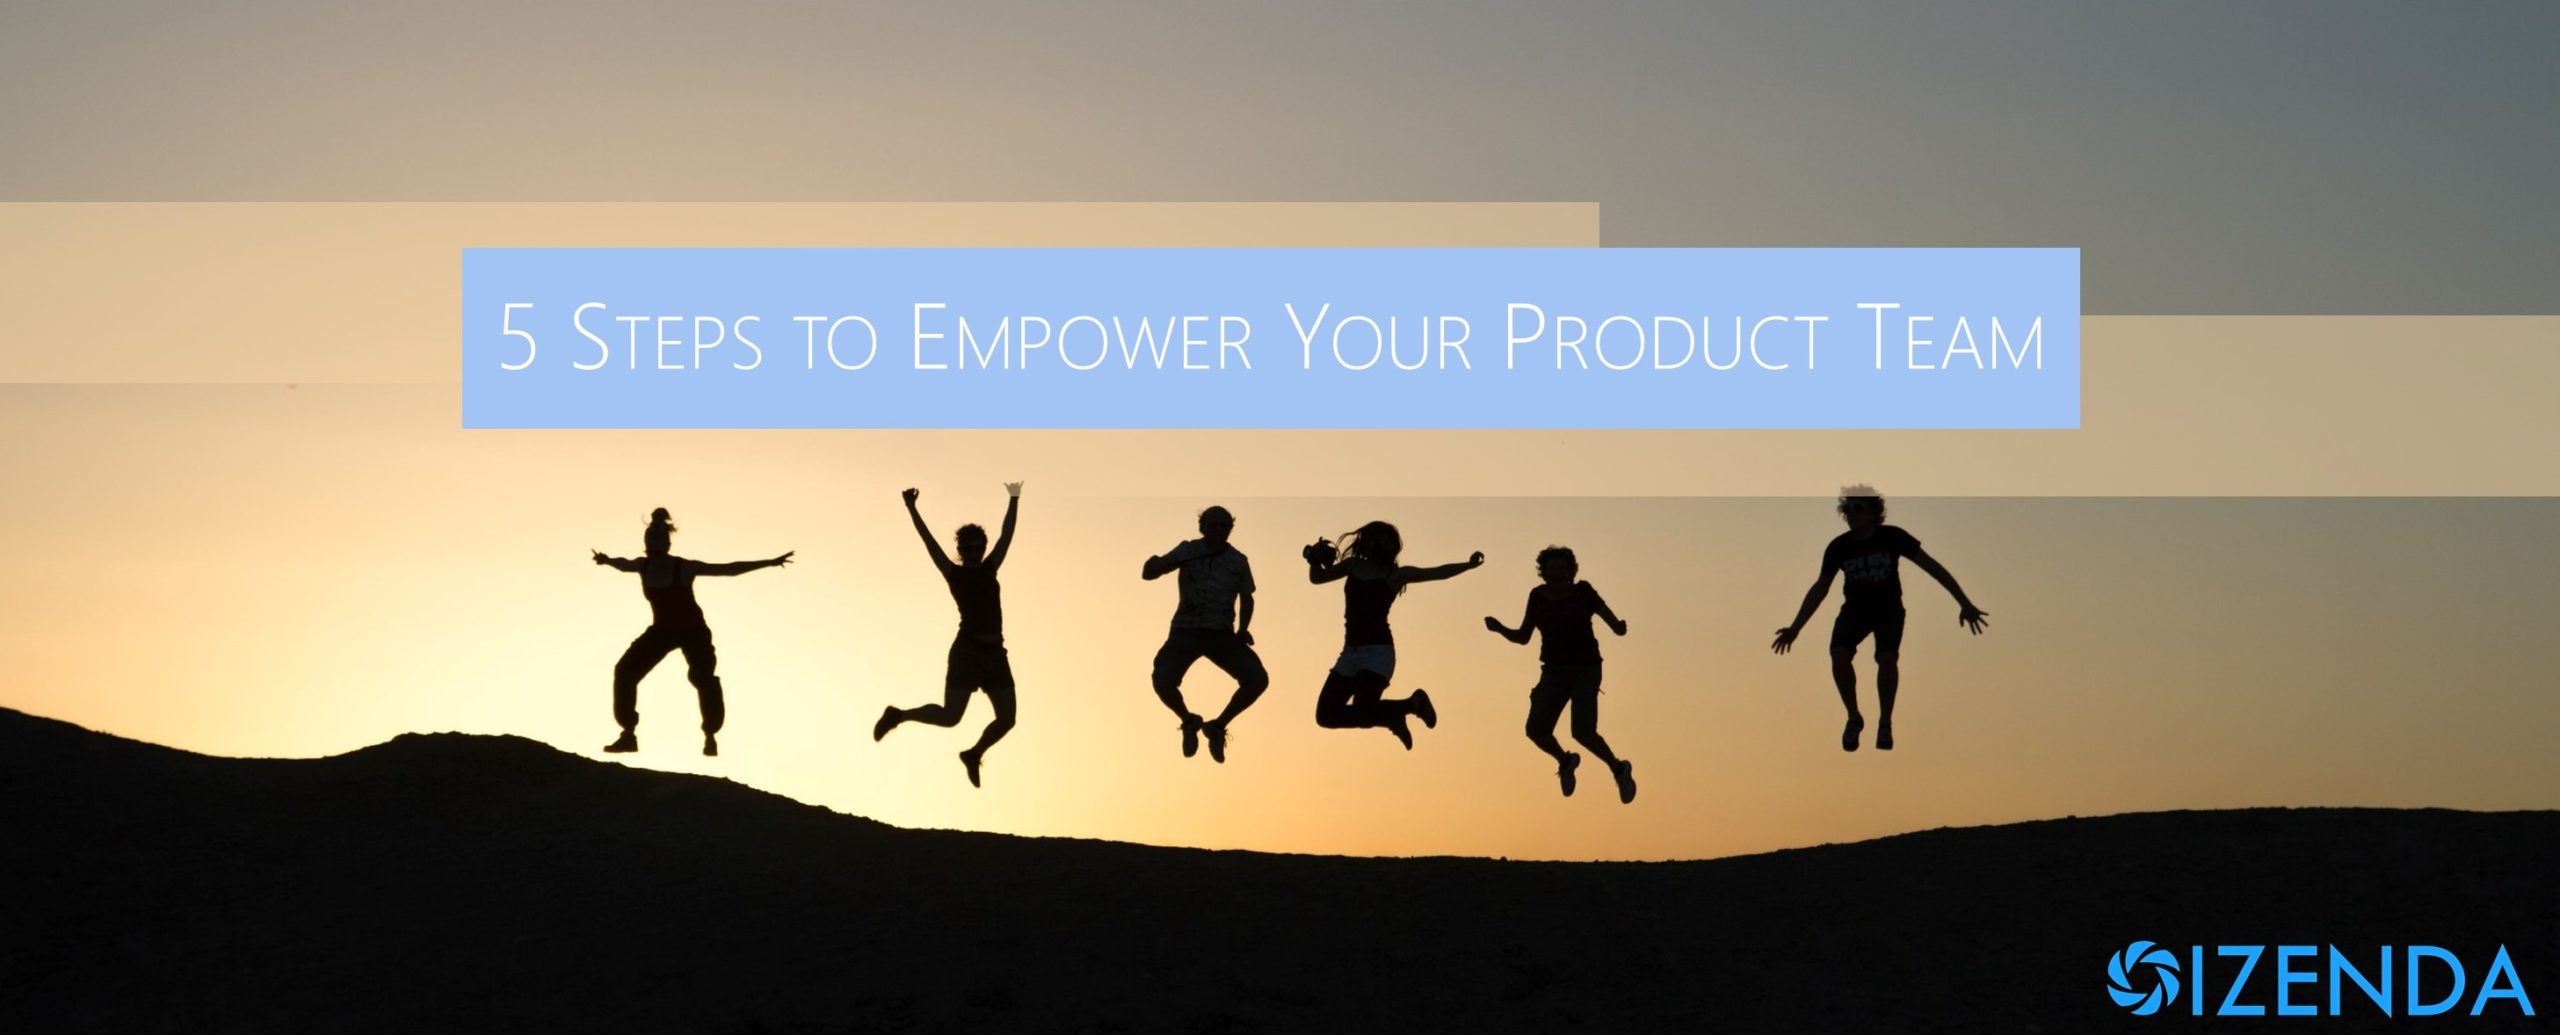 empower your product team in 5 steps